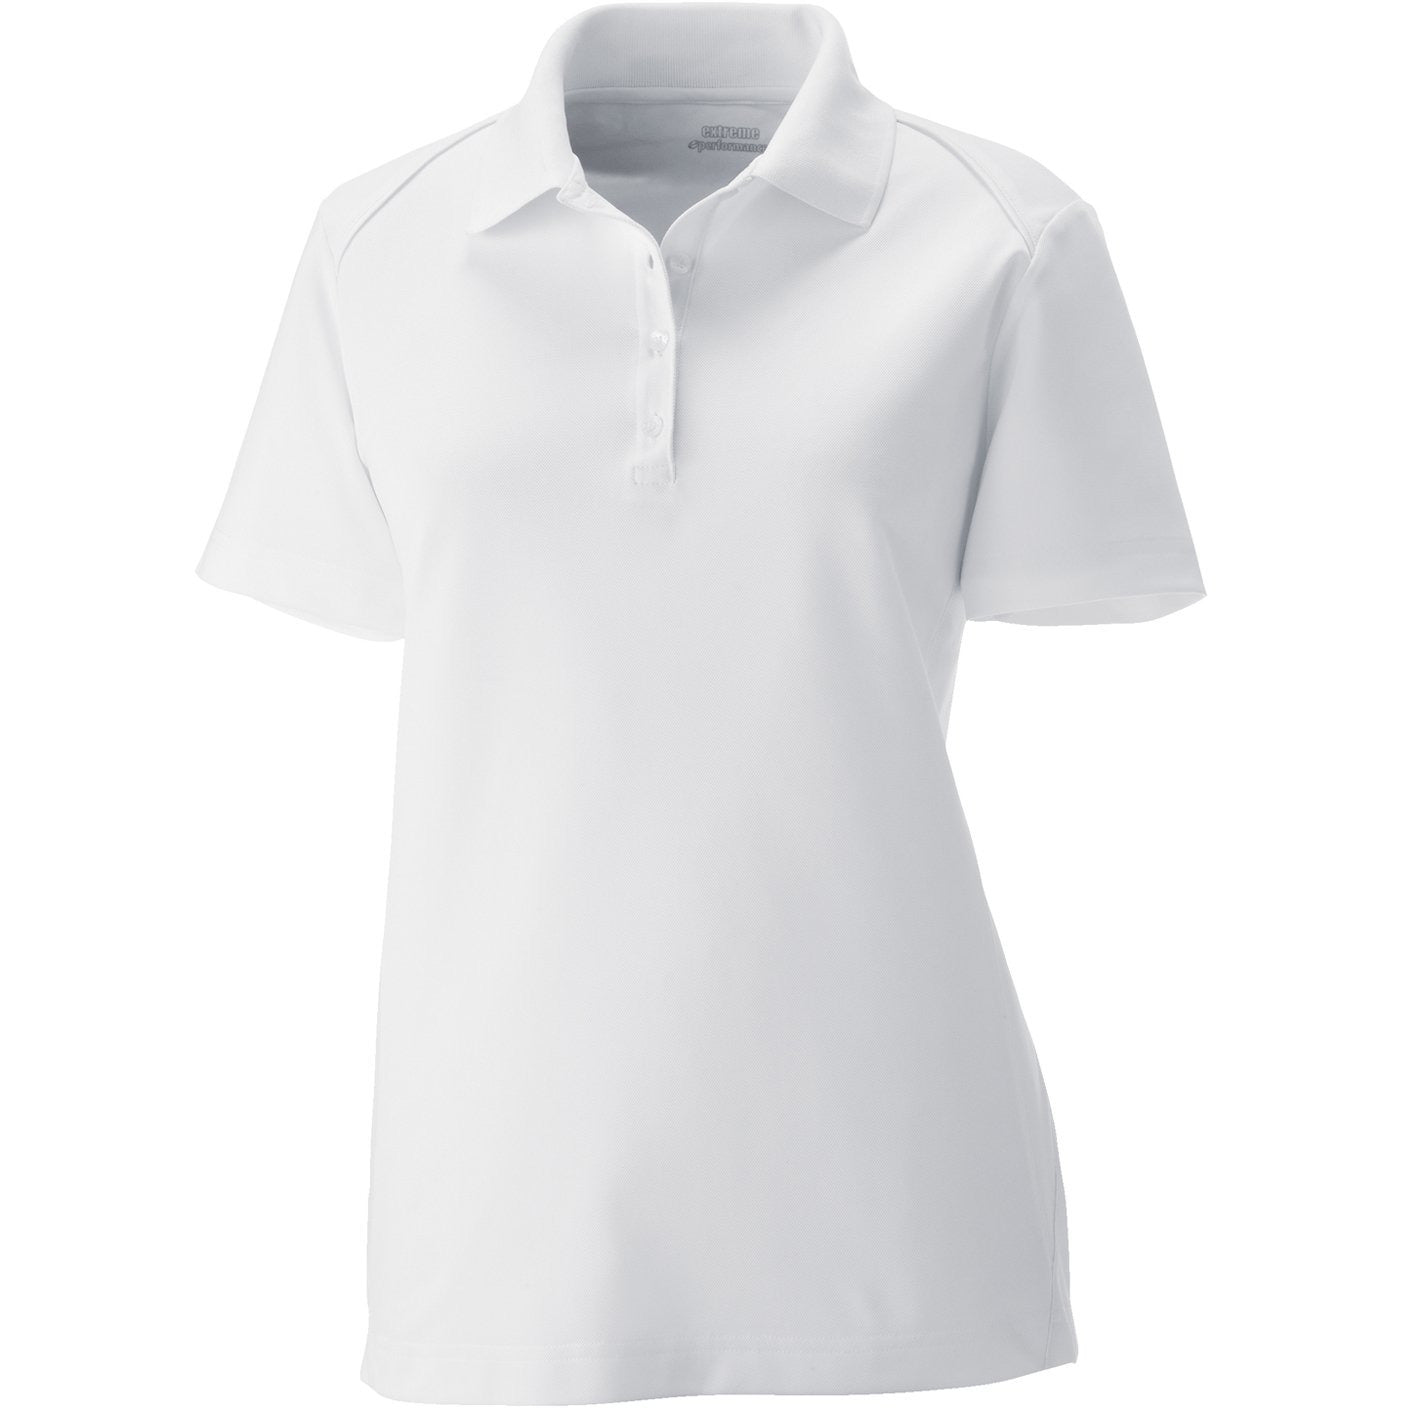 Ash City - Extreme Ladies' Eperformance™ Shield Snag Protection Short-Sleeve Polo